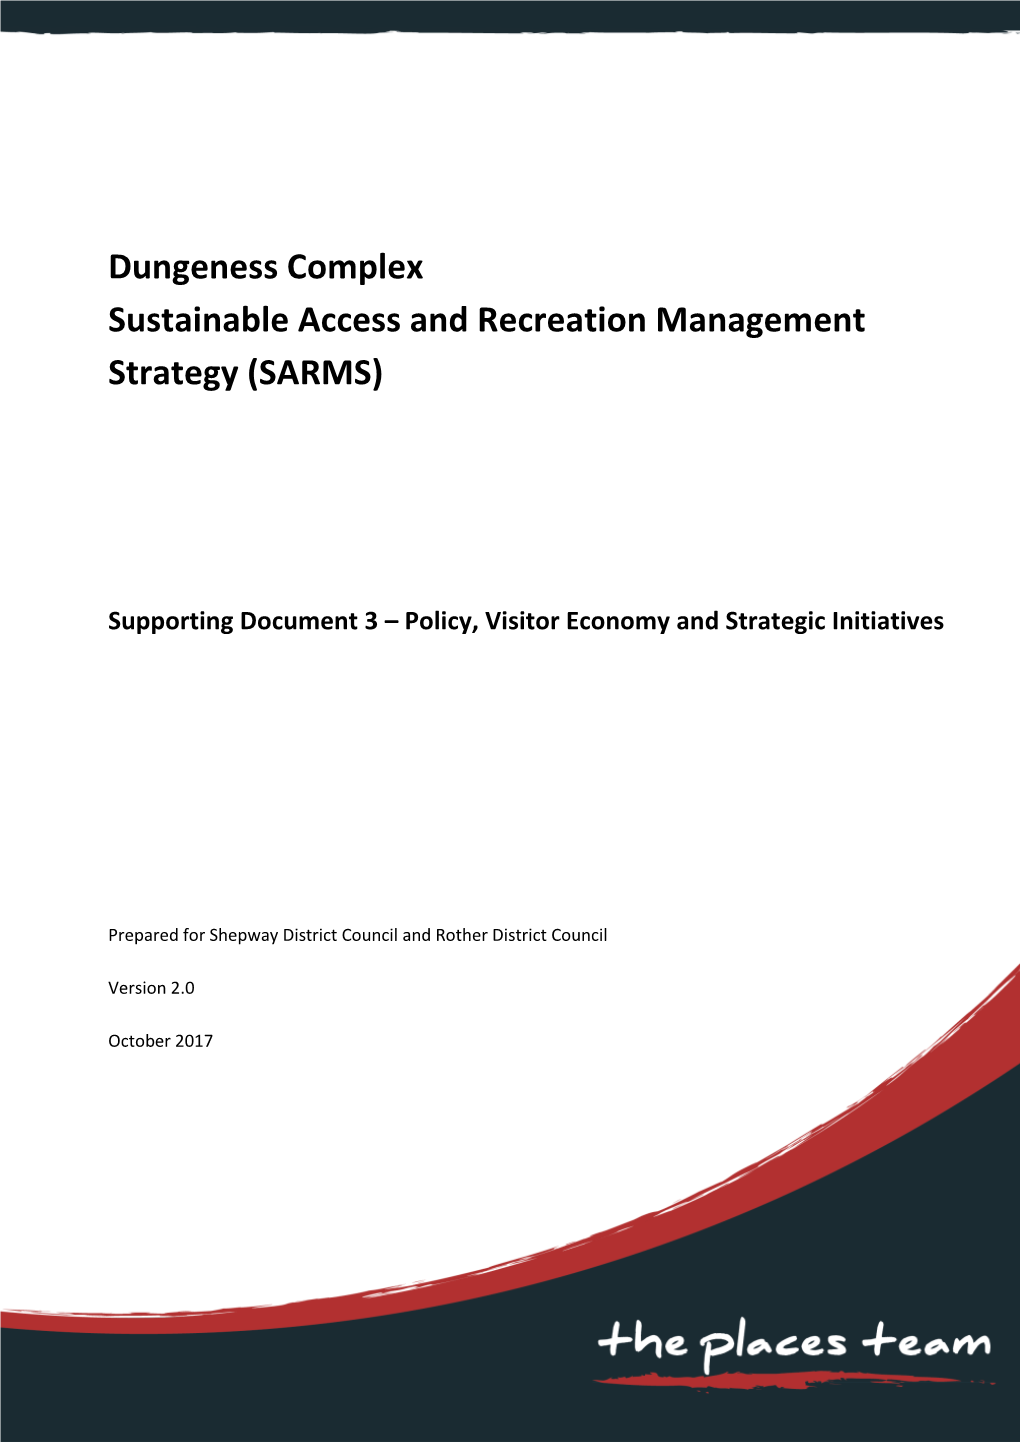 Dungeness Complex Sustainable Access and Recreation Management Strategy (SARMS)